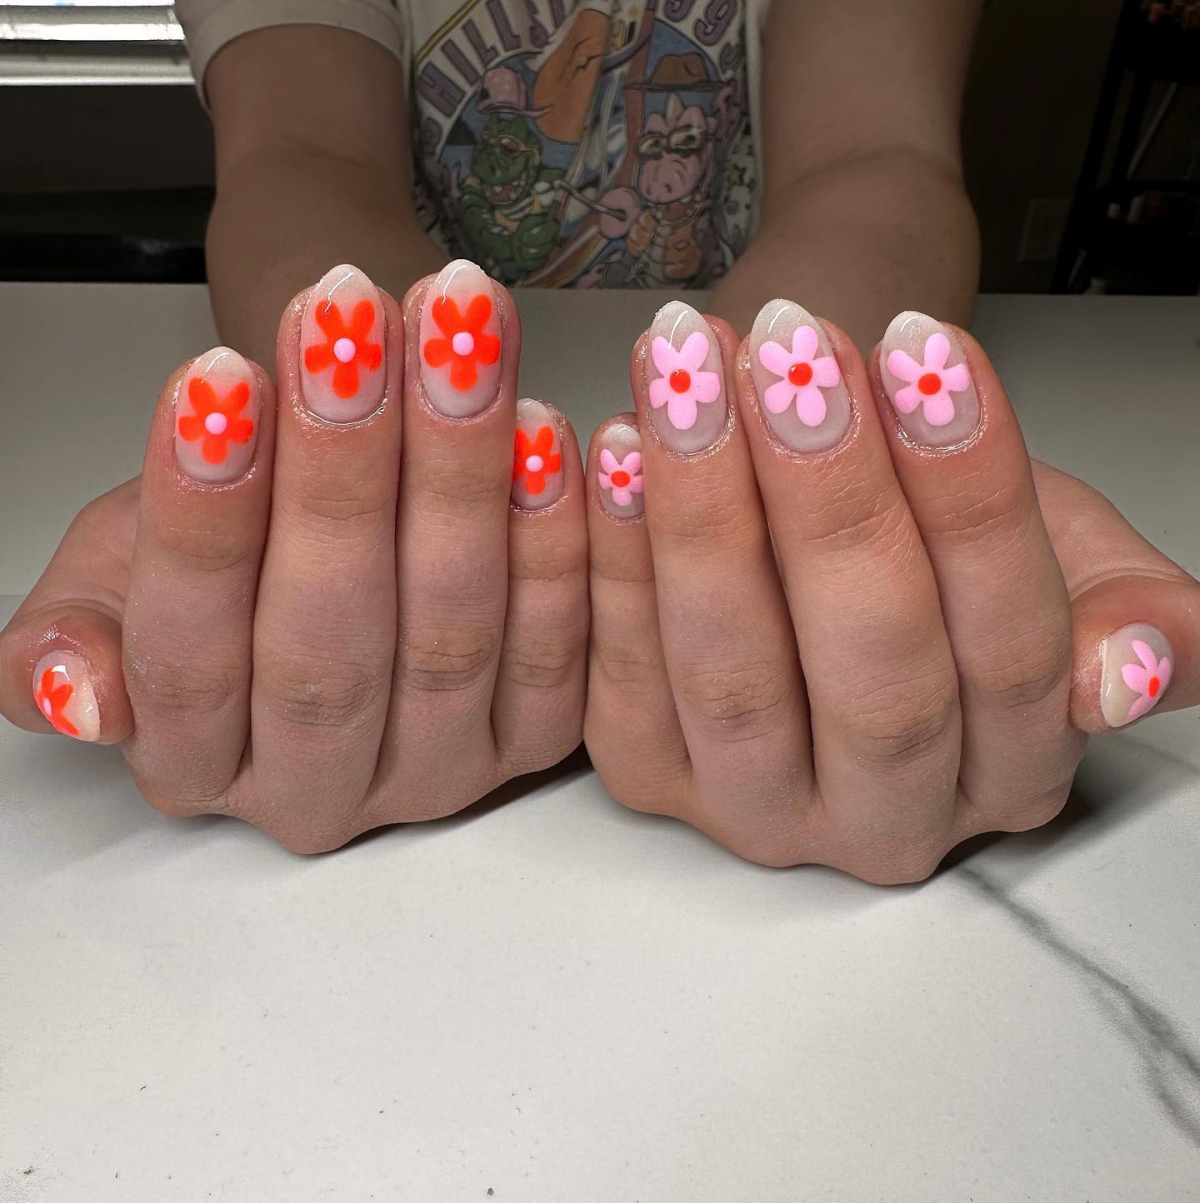 flowers pink and orange on nails